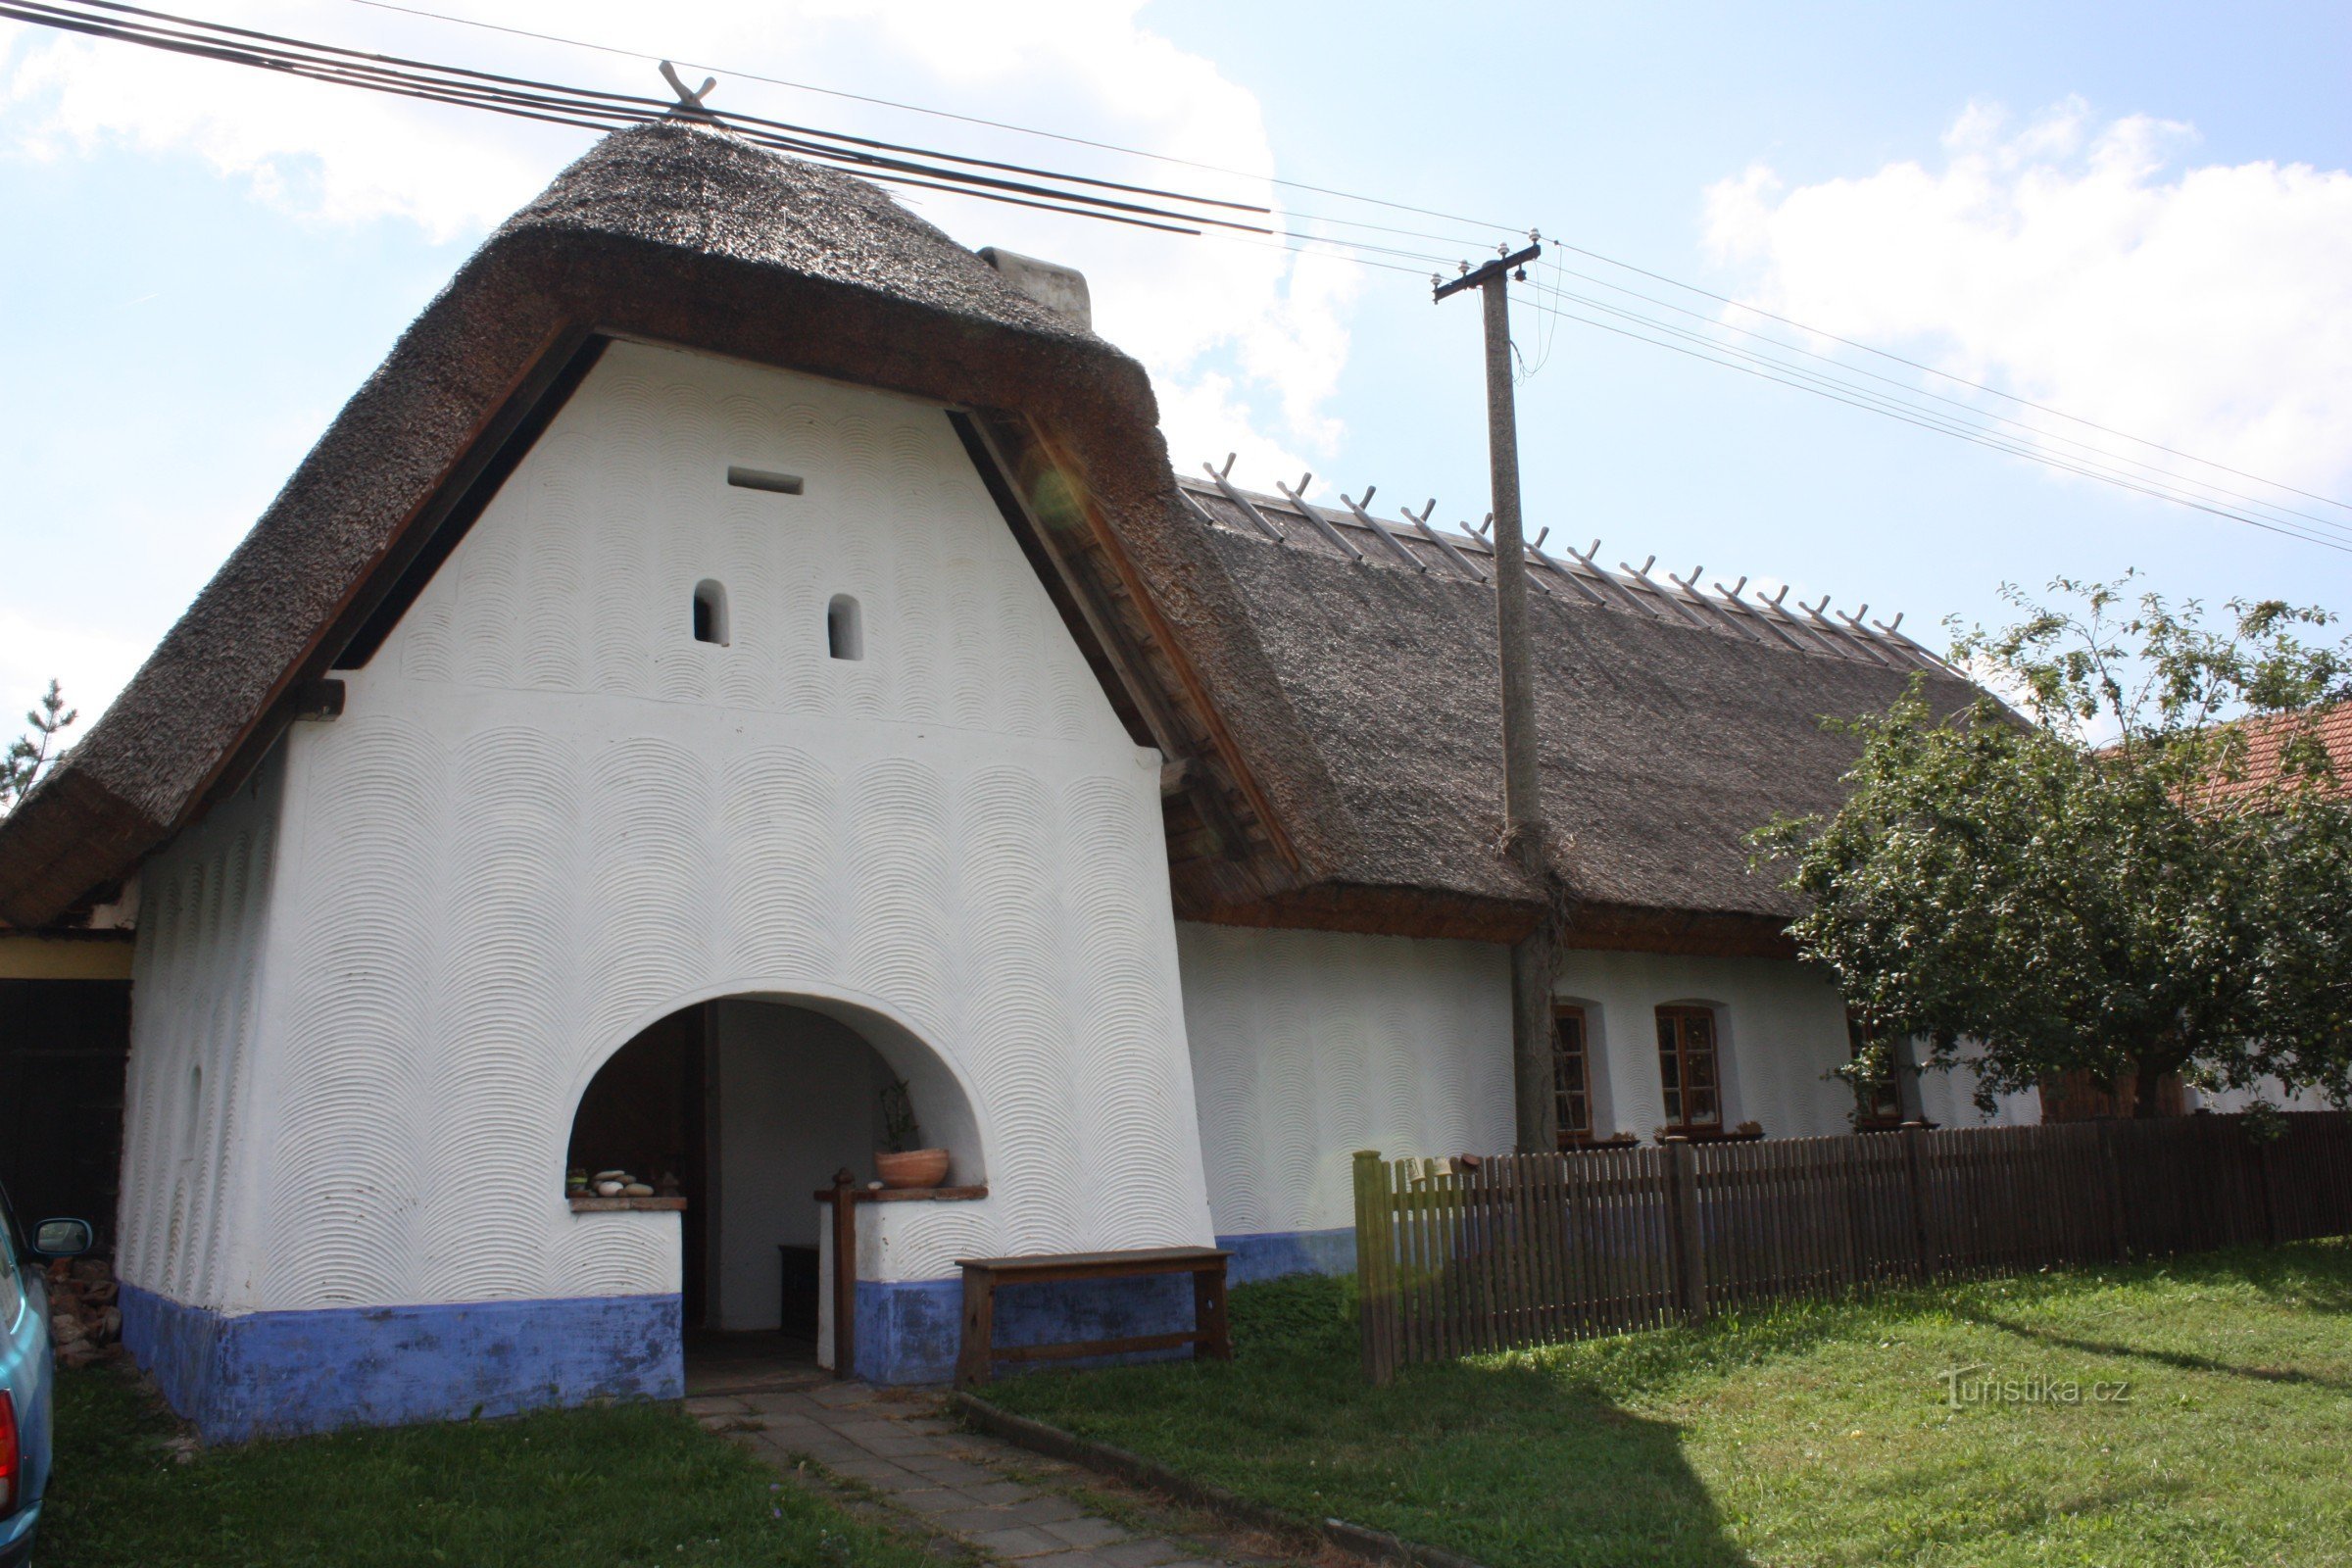 Grindhuis nr. 33 in Lysovice